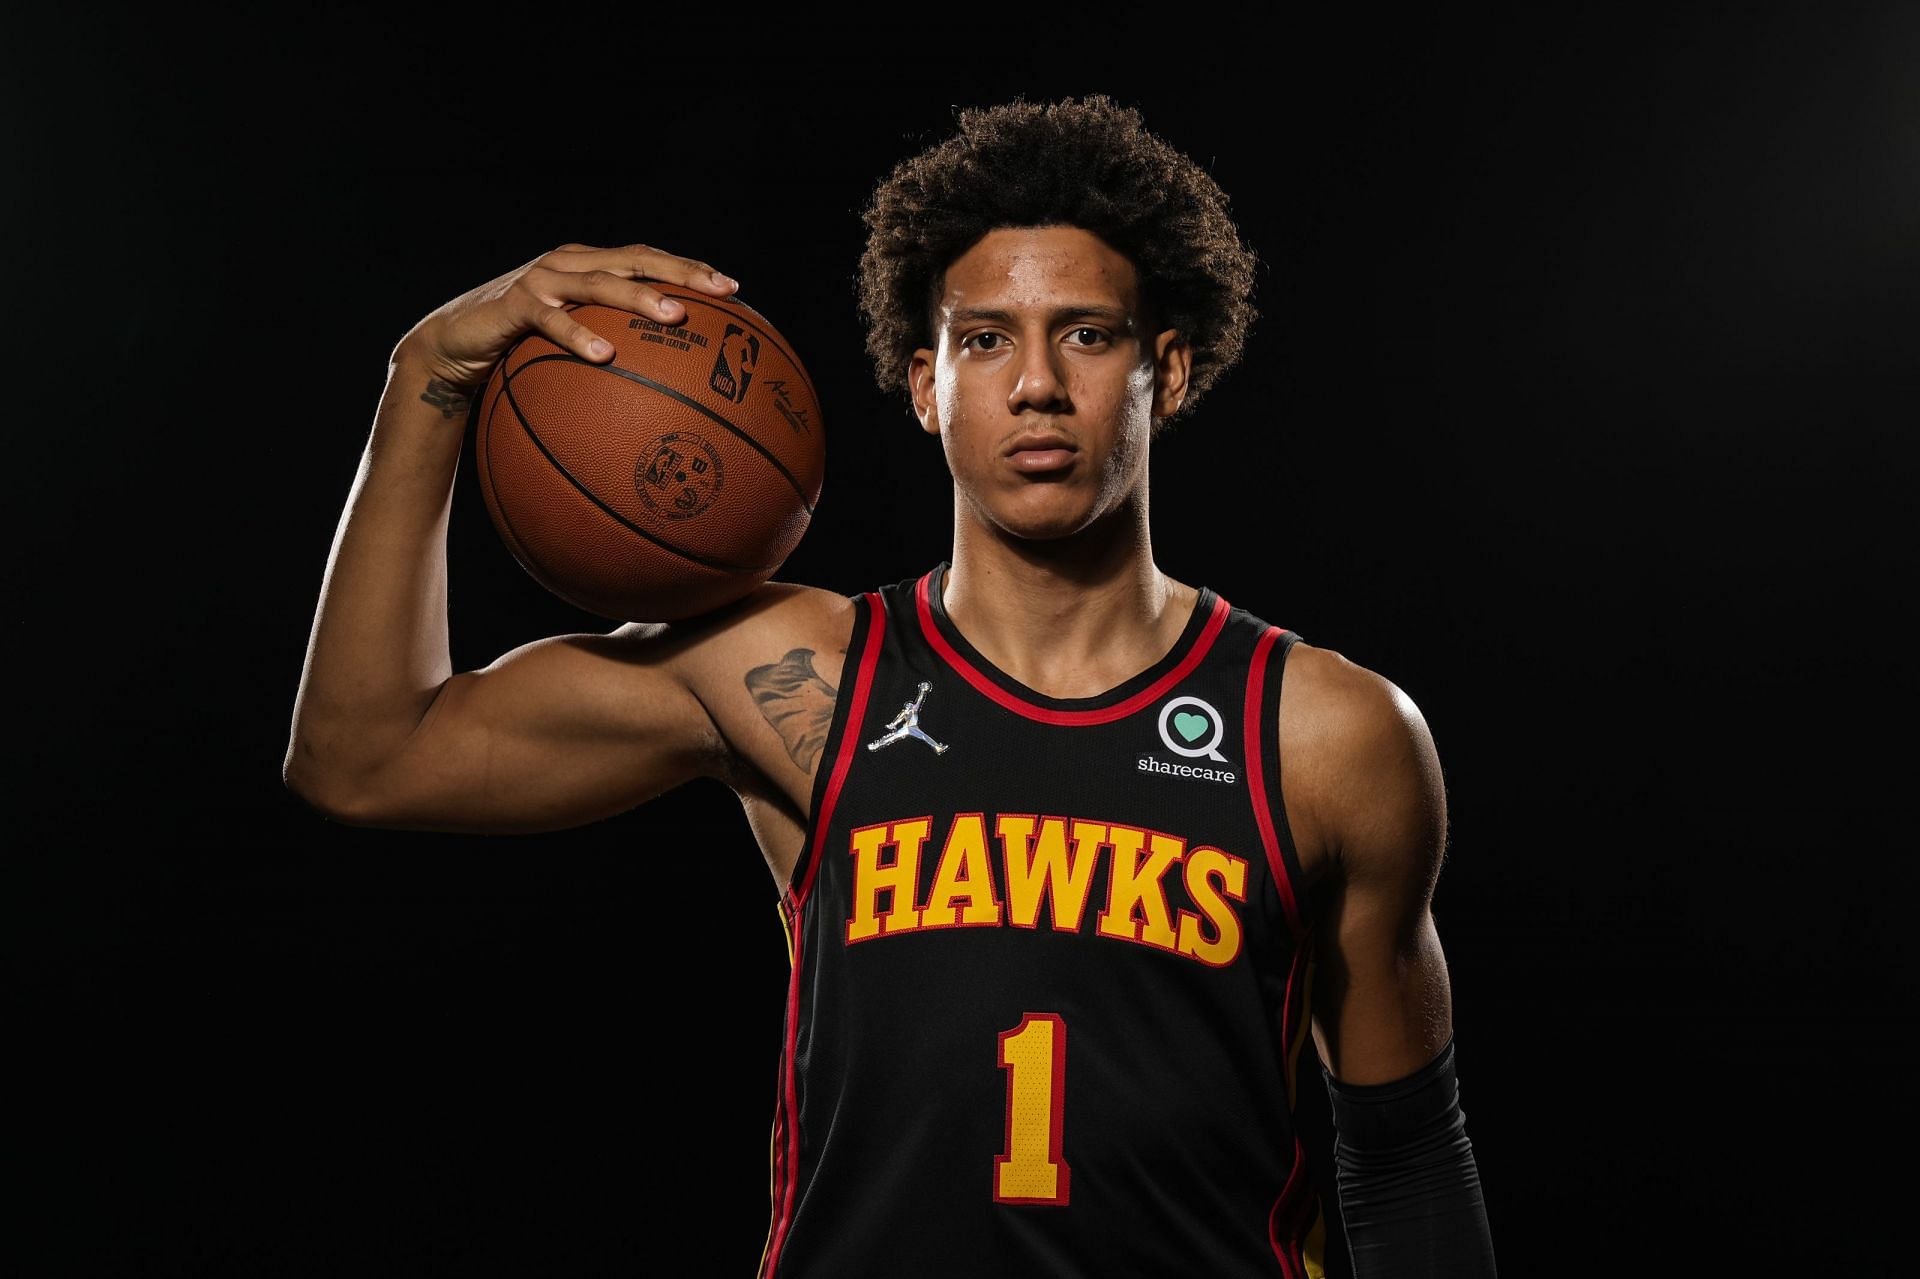 Jalen Johnson has received LeBron James comparisons in the G-League. [Photo: Soaring Down South]